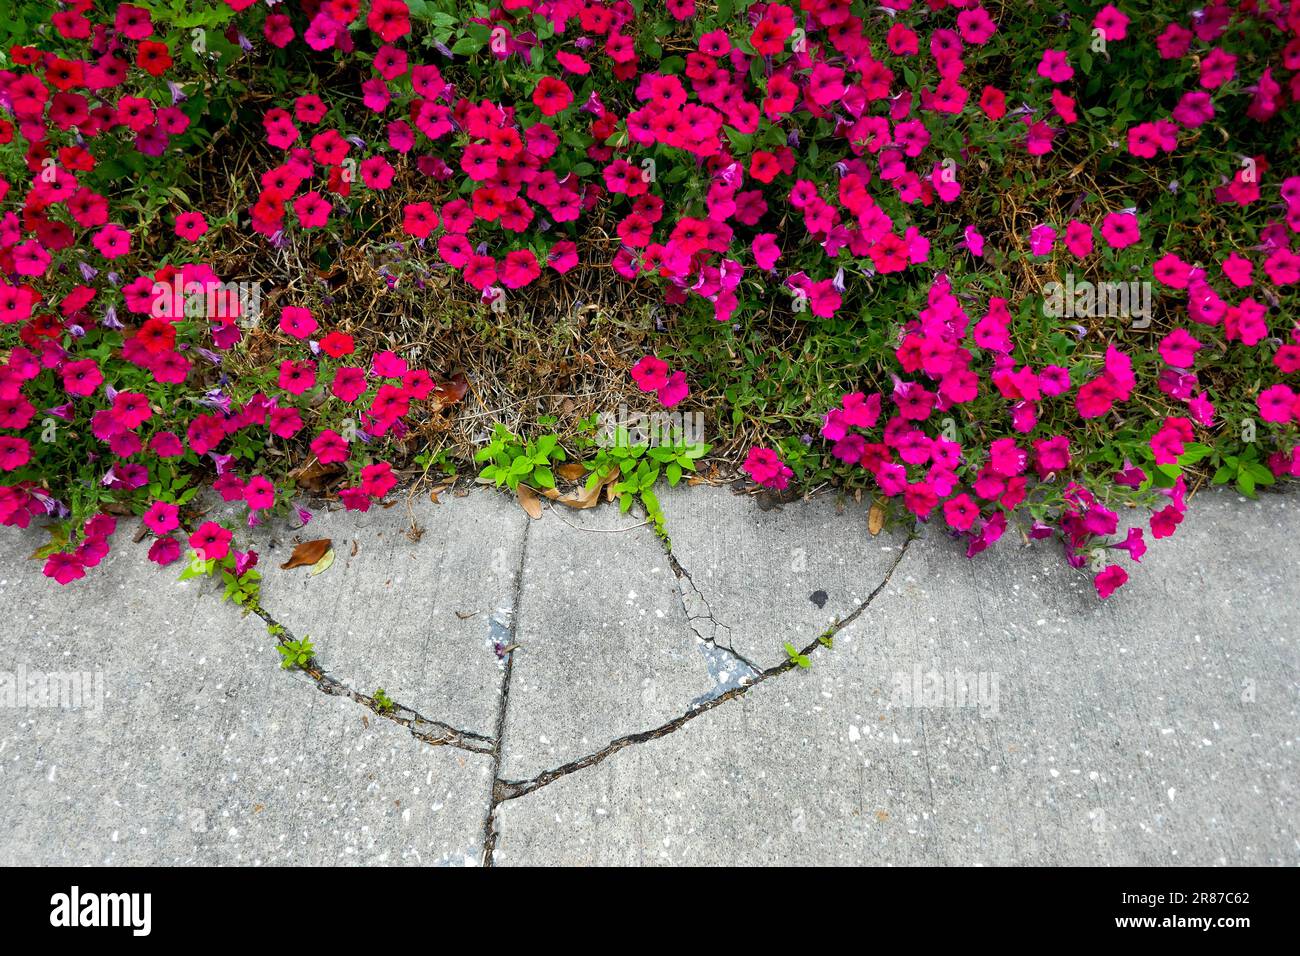 Landscape plants decorate an office building in North Florida. Stock Photo